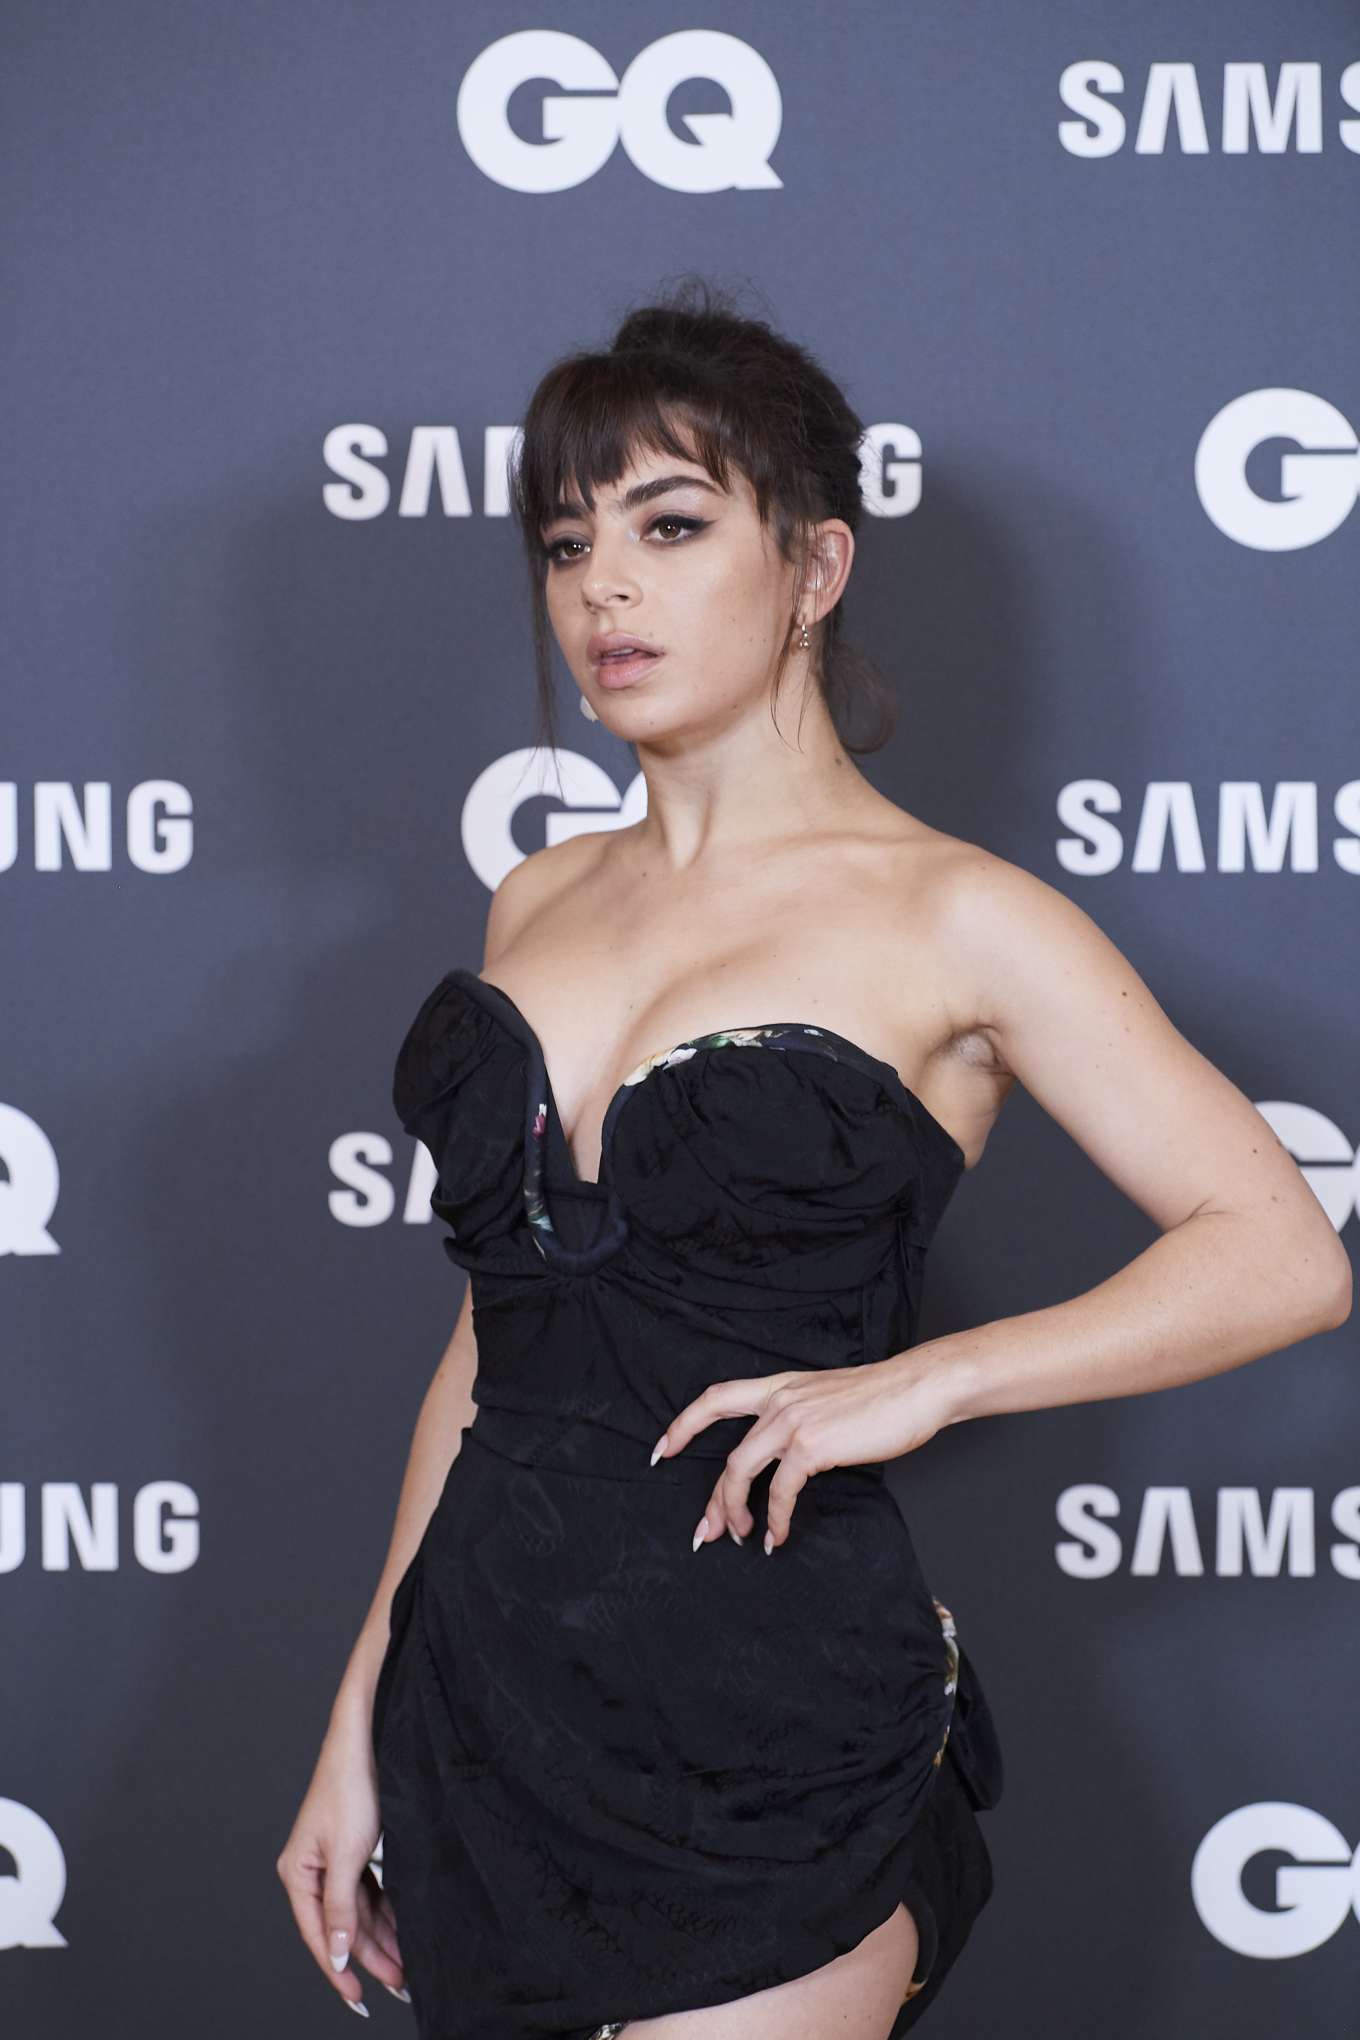 Charli XCX Attends 2019 GQ Men of The Year Awards in 